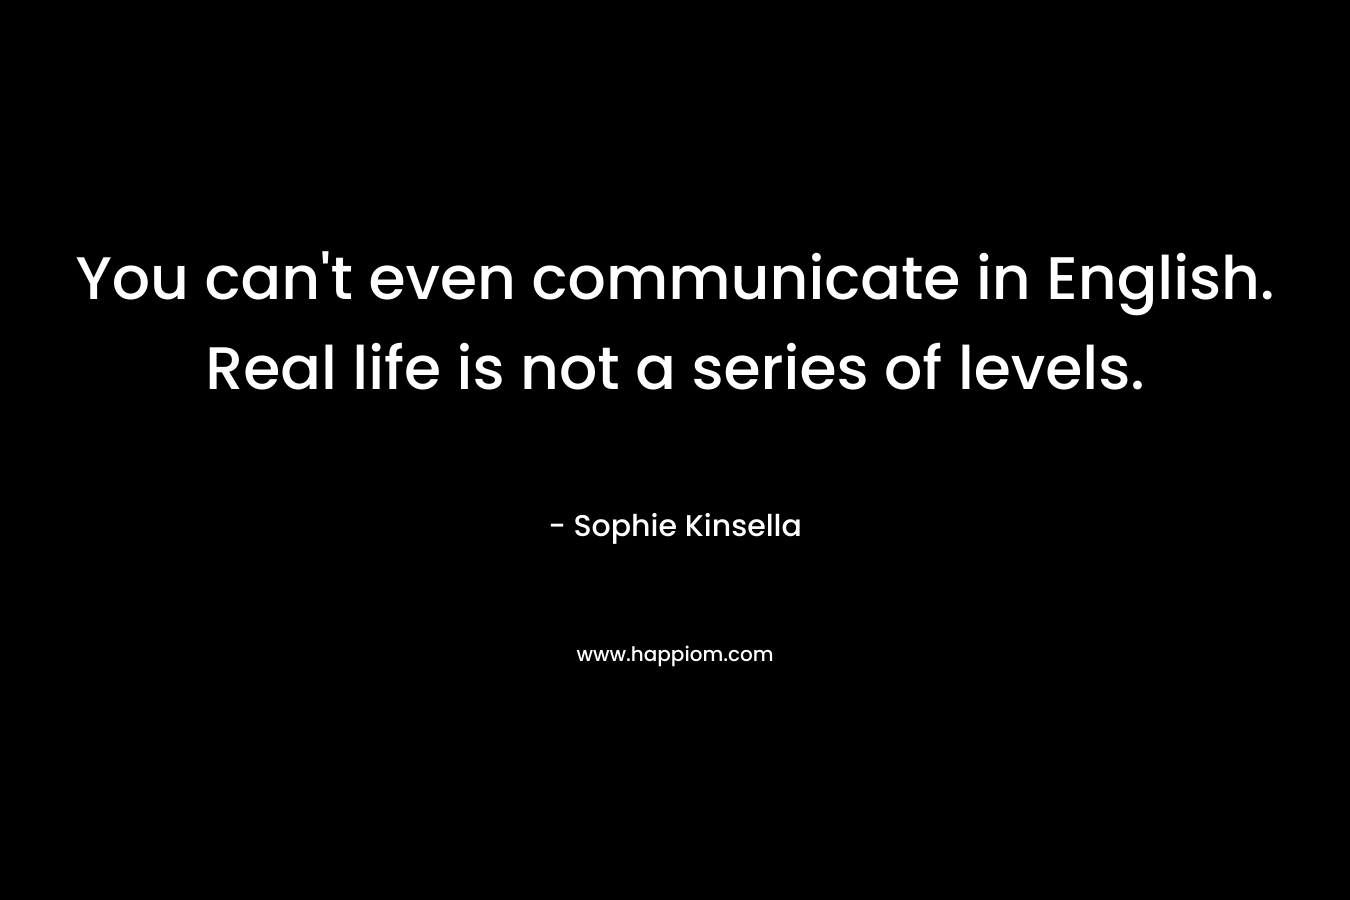 You can't even communicate in English. Real life is not a series of levels.